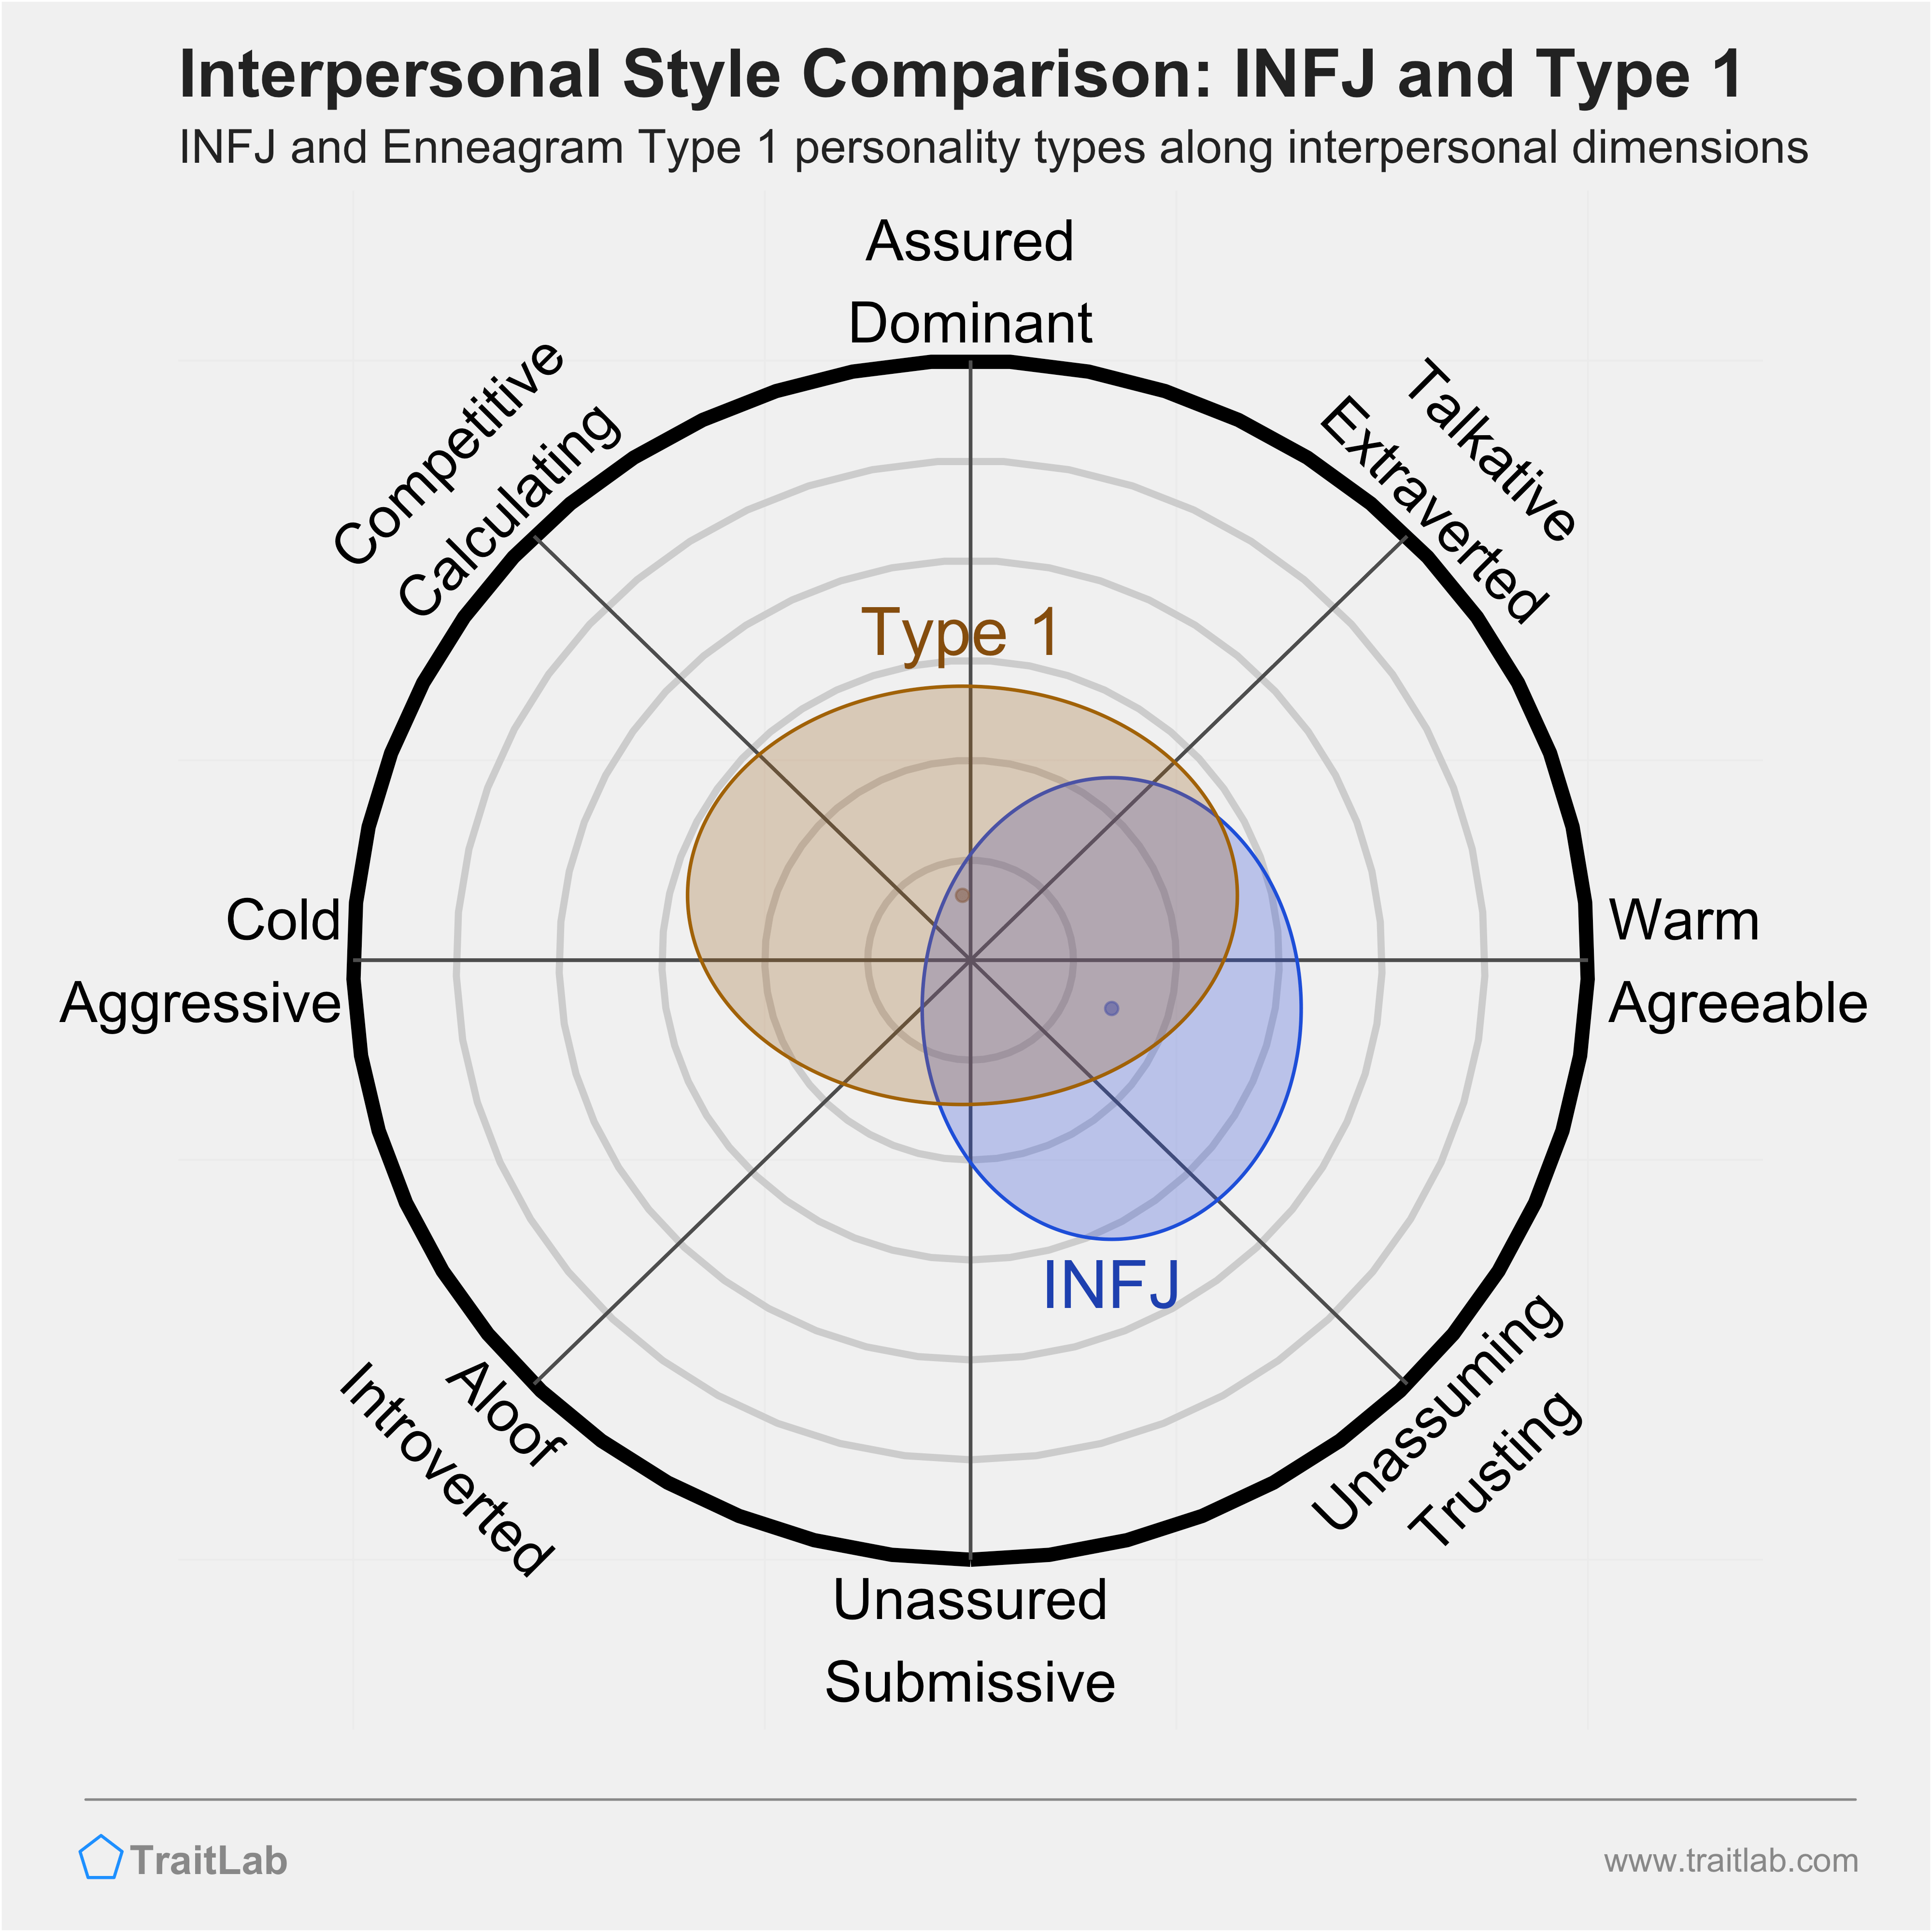 Enneagram INFJ and Type 1 comparison across interpersonal dimensions